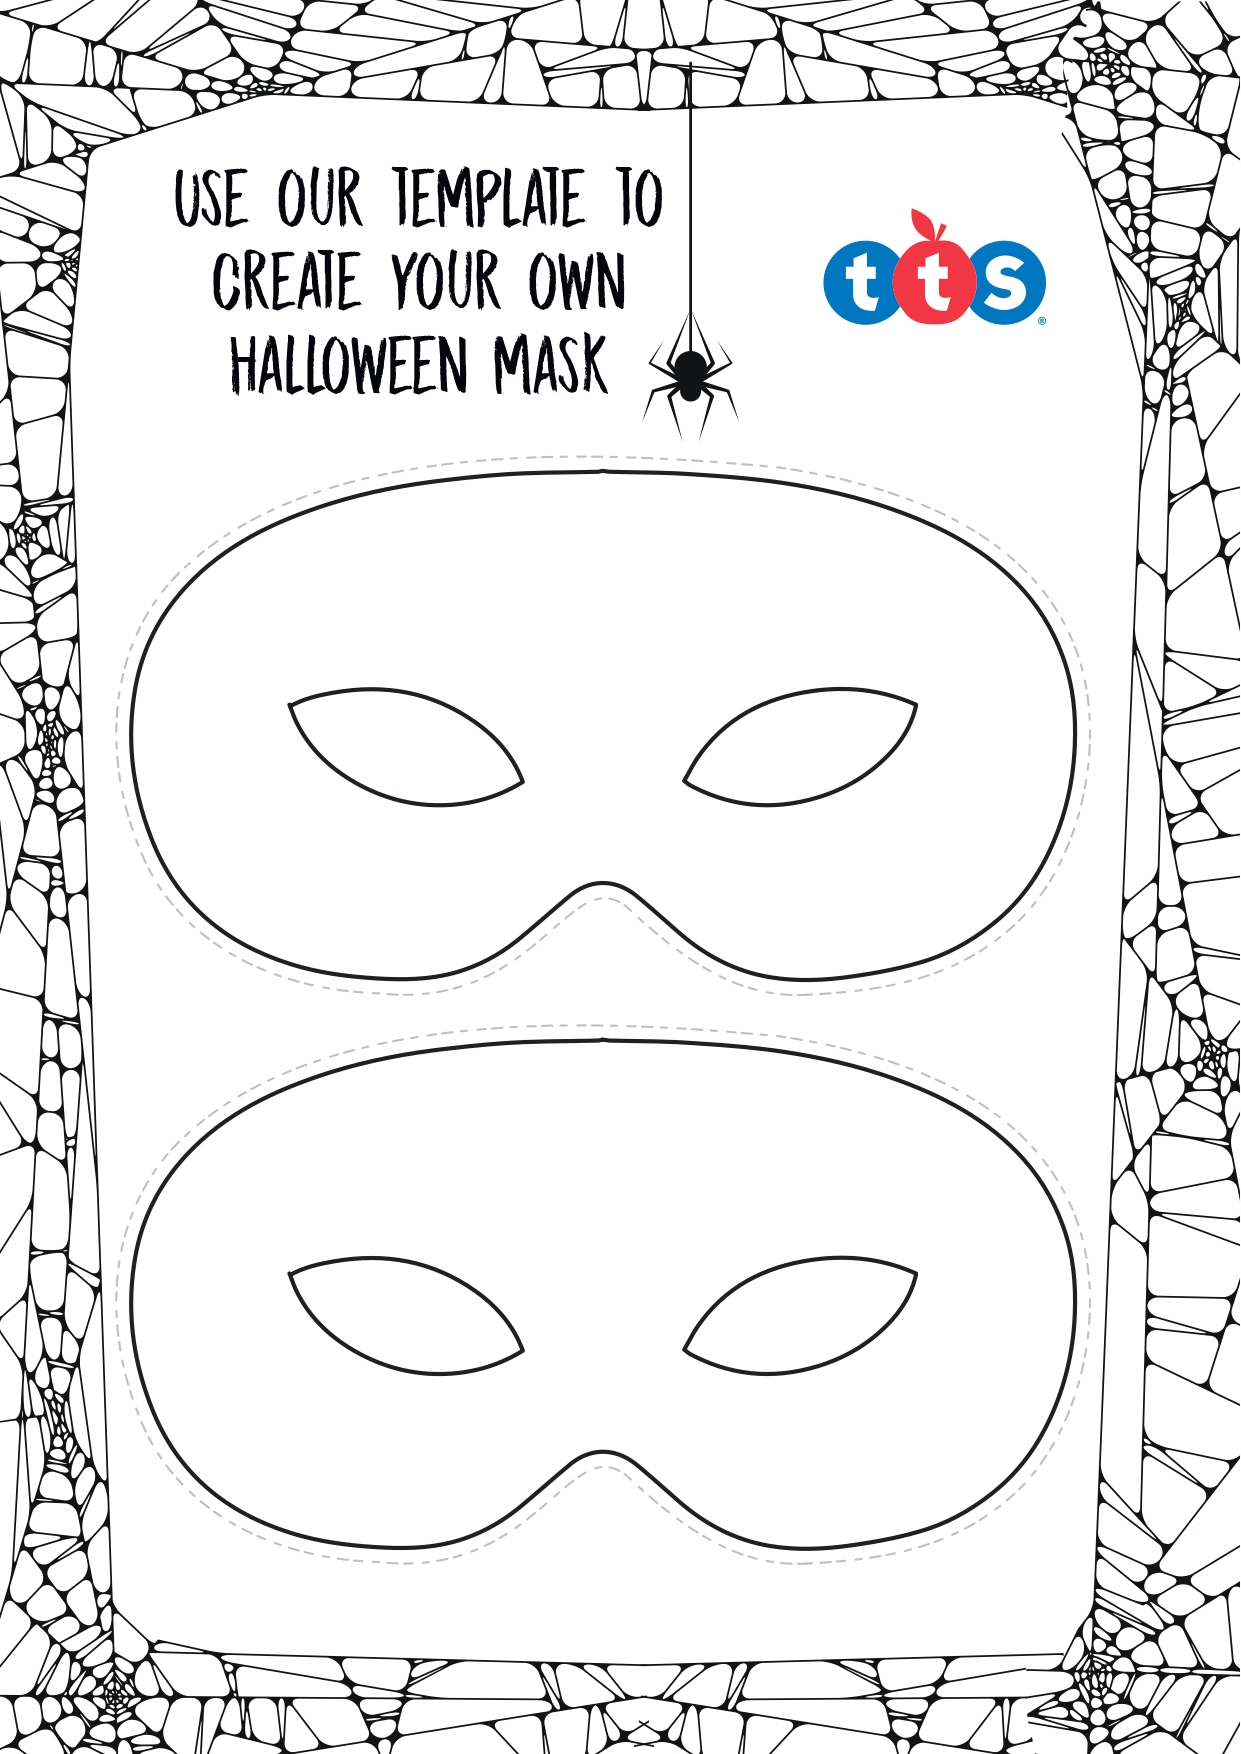 Halloween_Downloadable_Template_TTS-pages-2_page-0001